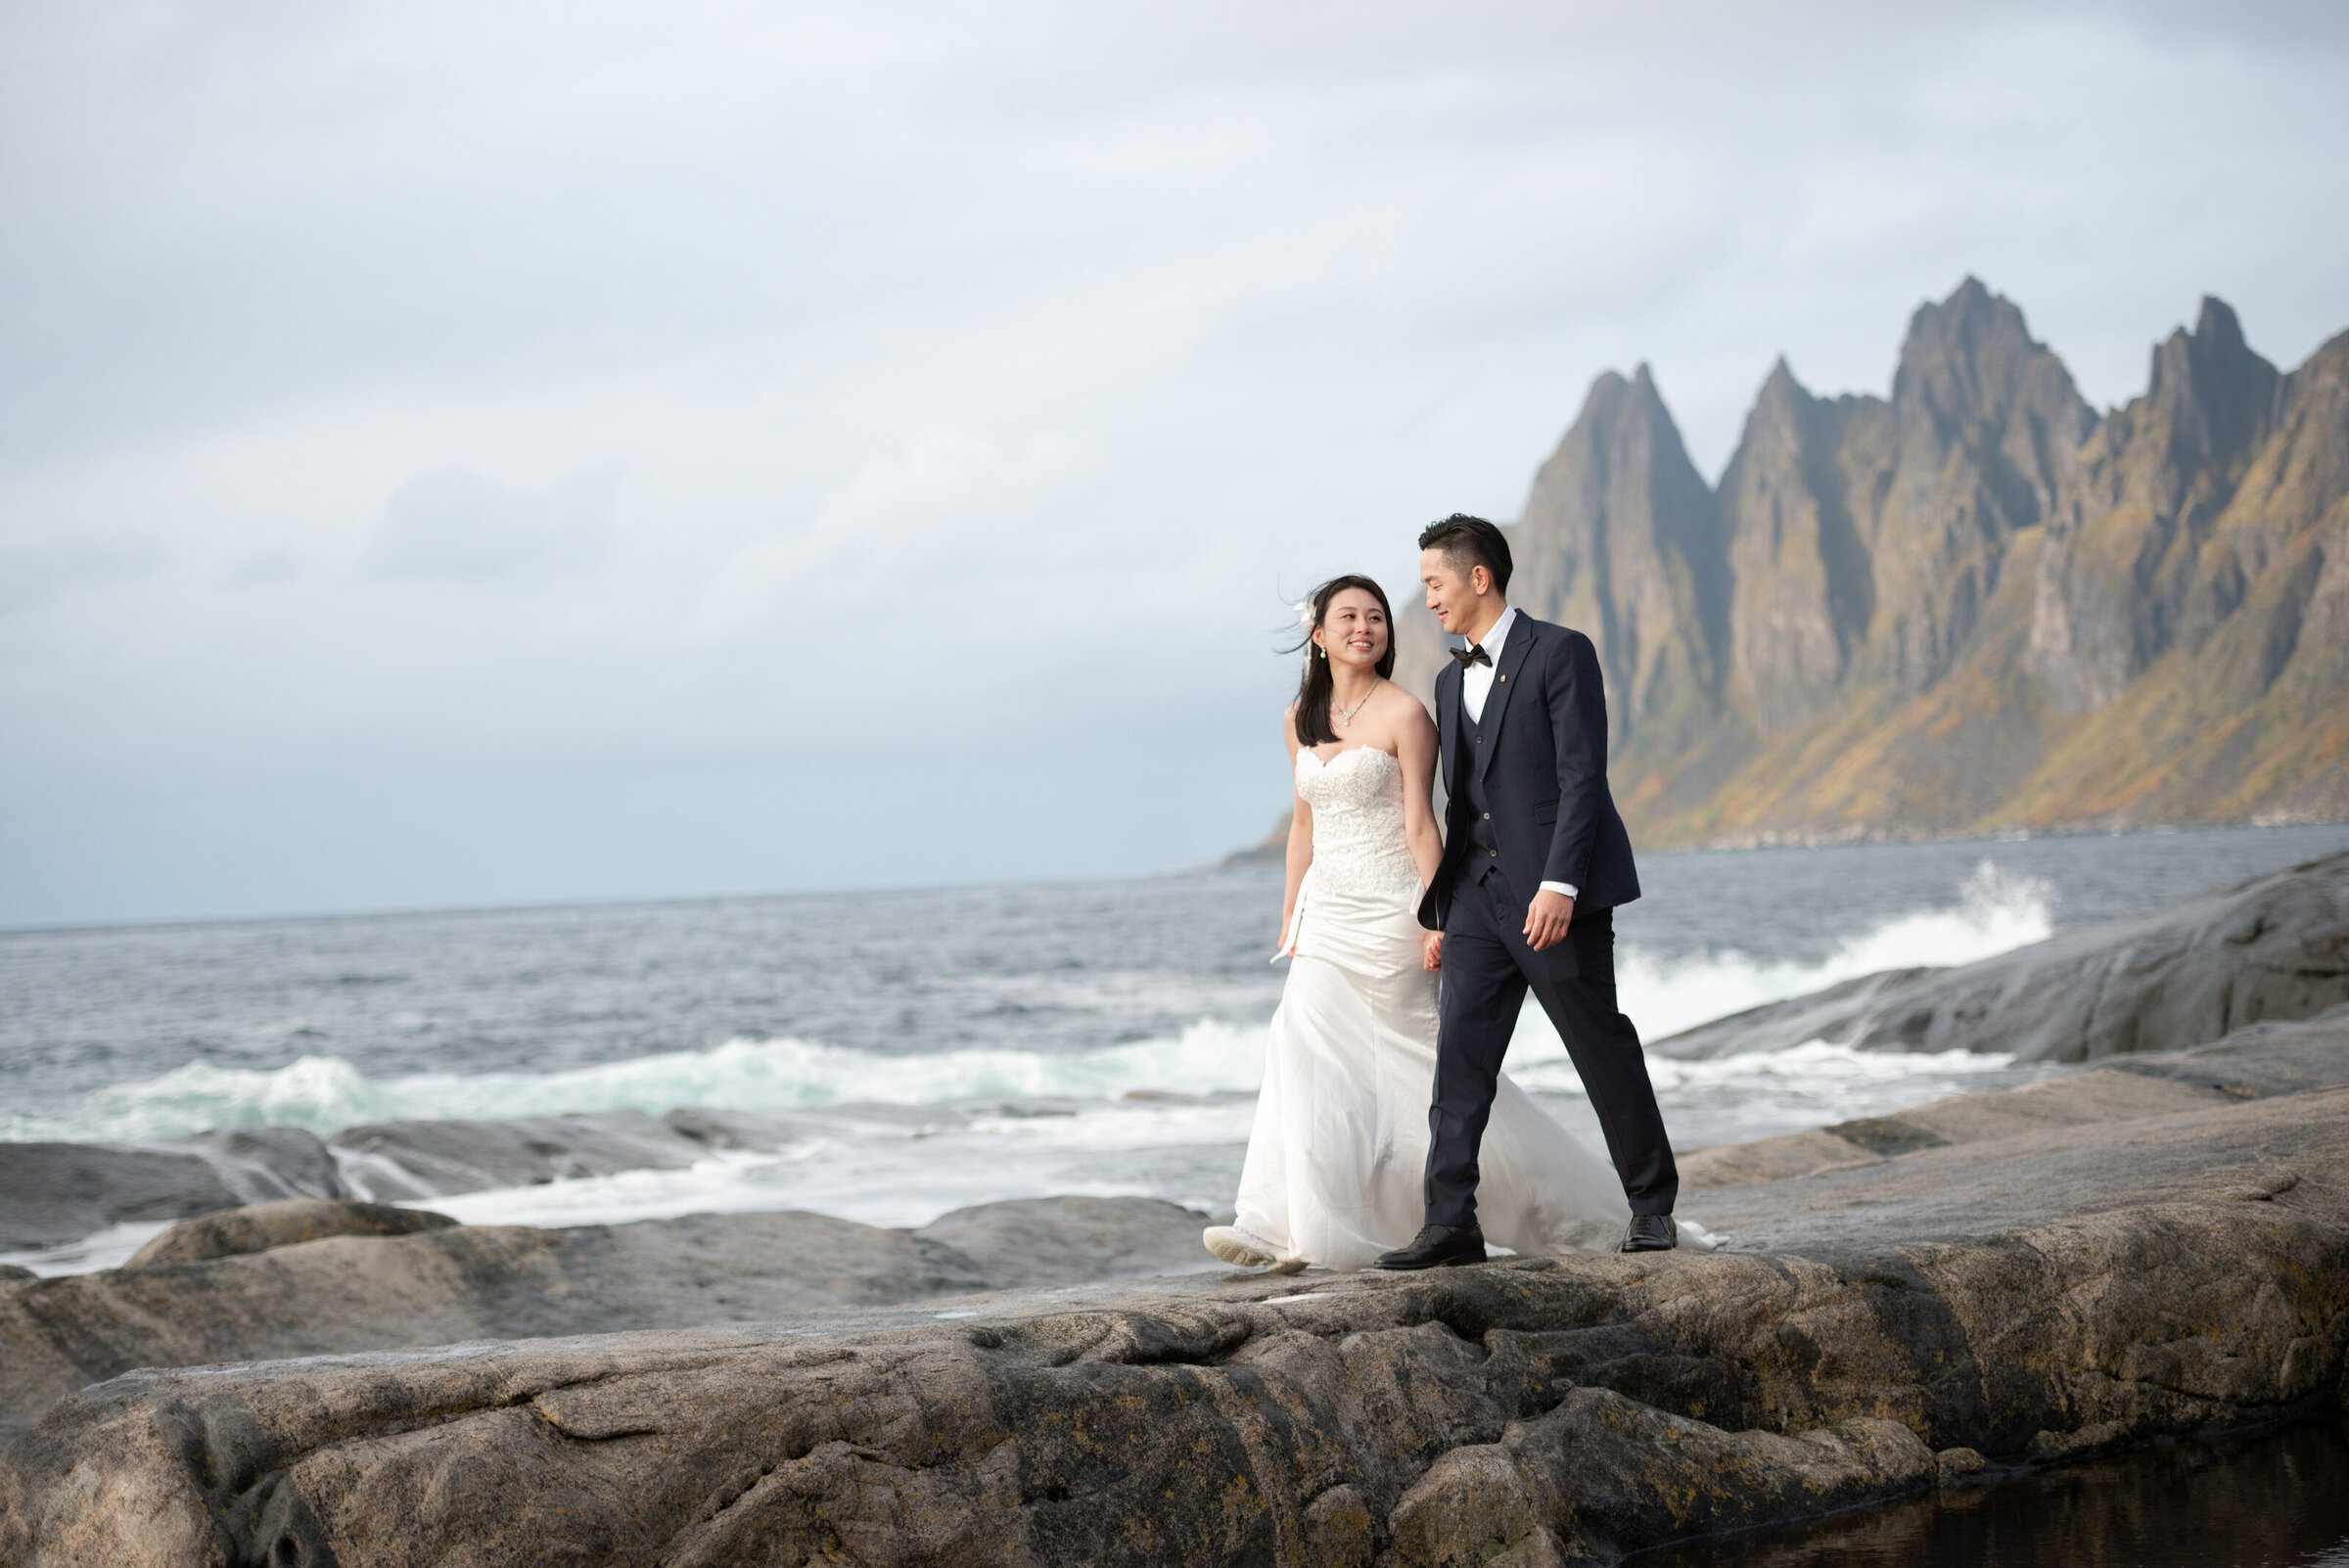 An Asian couple celebrates their elopement on the rugged shores of Senja, Norway, with the jagged teeth of the Tungeneset mountains behind them, encapsulating the wild spirit and beauty of their unique wedding day.